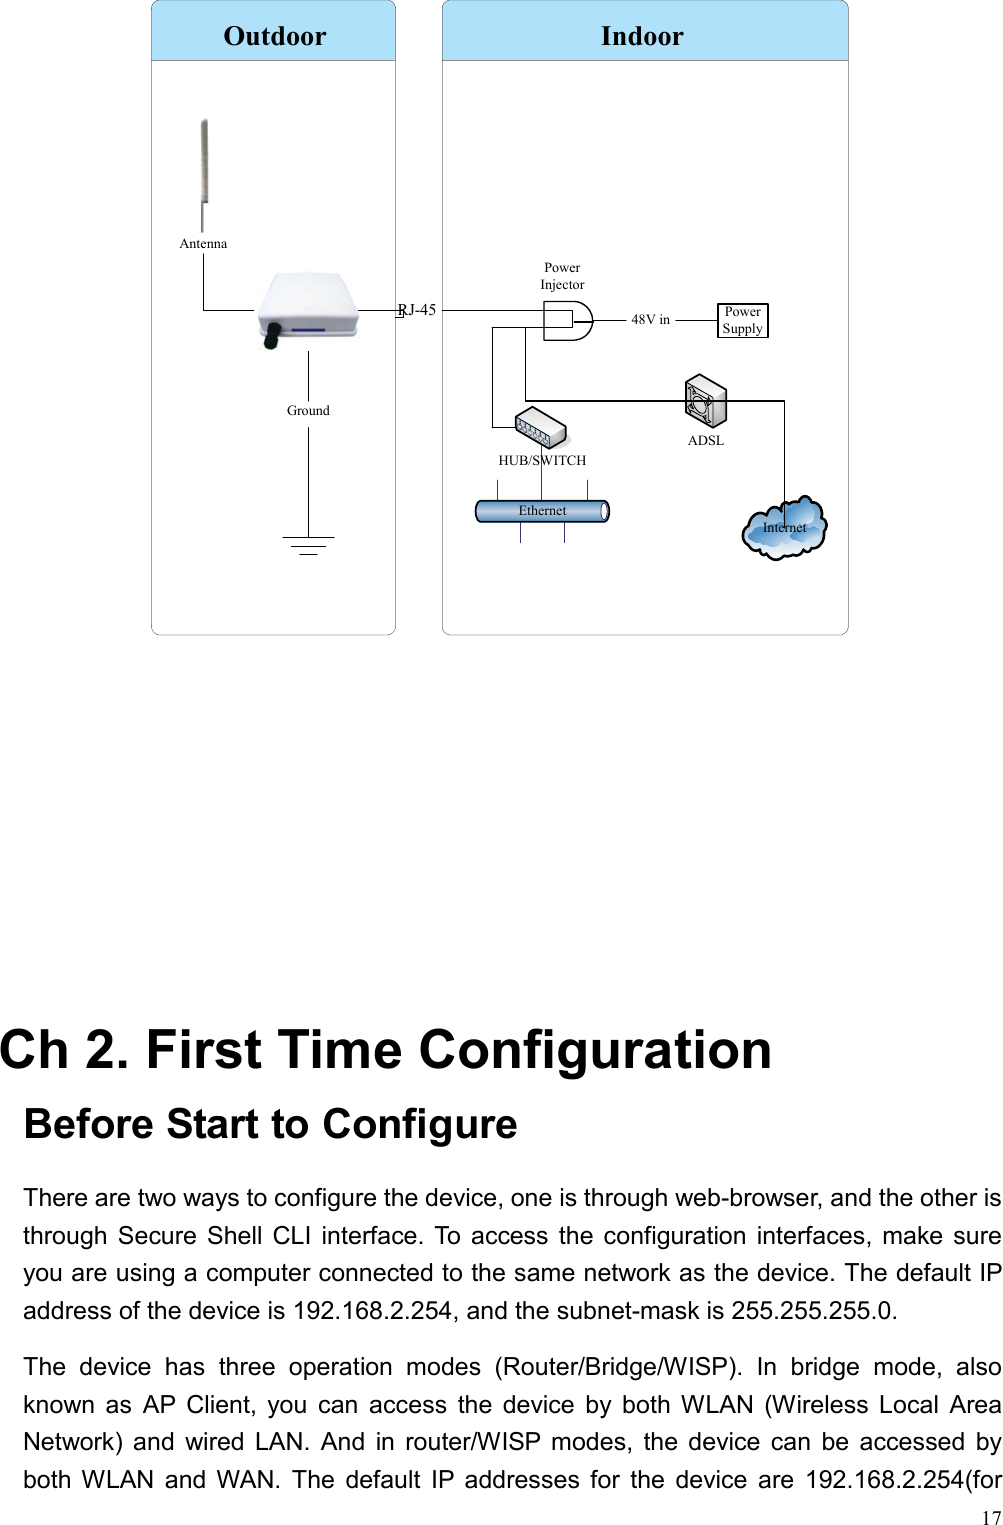  17          Ch 2. First Time Configuration Before Start to Configure There are two ways to configure the device, one is through web-browser, and the other is through Secure Shell CLI interface. To access the configuration interfaces, make sure you are using a computer connected to the same network as the device. The default IP address of the device is 192.168.2.254, and the subnet-mask is 255.255.255.0. The device has three operation modes (Router/Bridge/WISP). In bridge mode, also known as AP Client, you can access the device by both WLAN (Wireless Local Area Network) and wired LAN. And in router/WISP modes, the device can be accessed by both WLAN and WAN. The default IP addresses for the device are 192.168.2.254(for InternetEthernetHUB/SWITCHADSLGroundOutdoor IndoorPower InjectorPower SupplyRJ-45 48V inAntenna